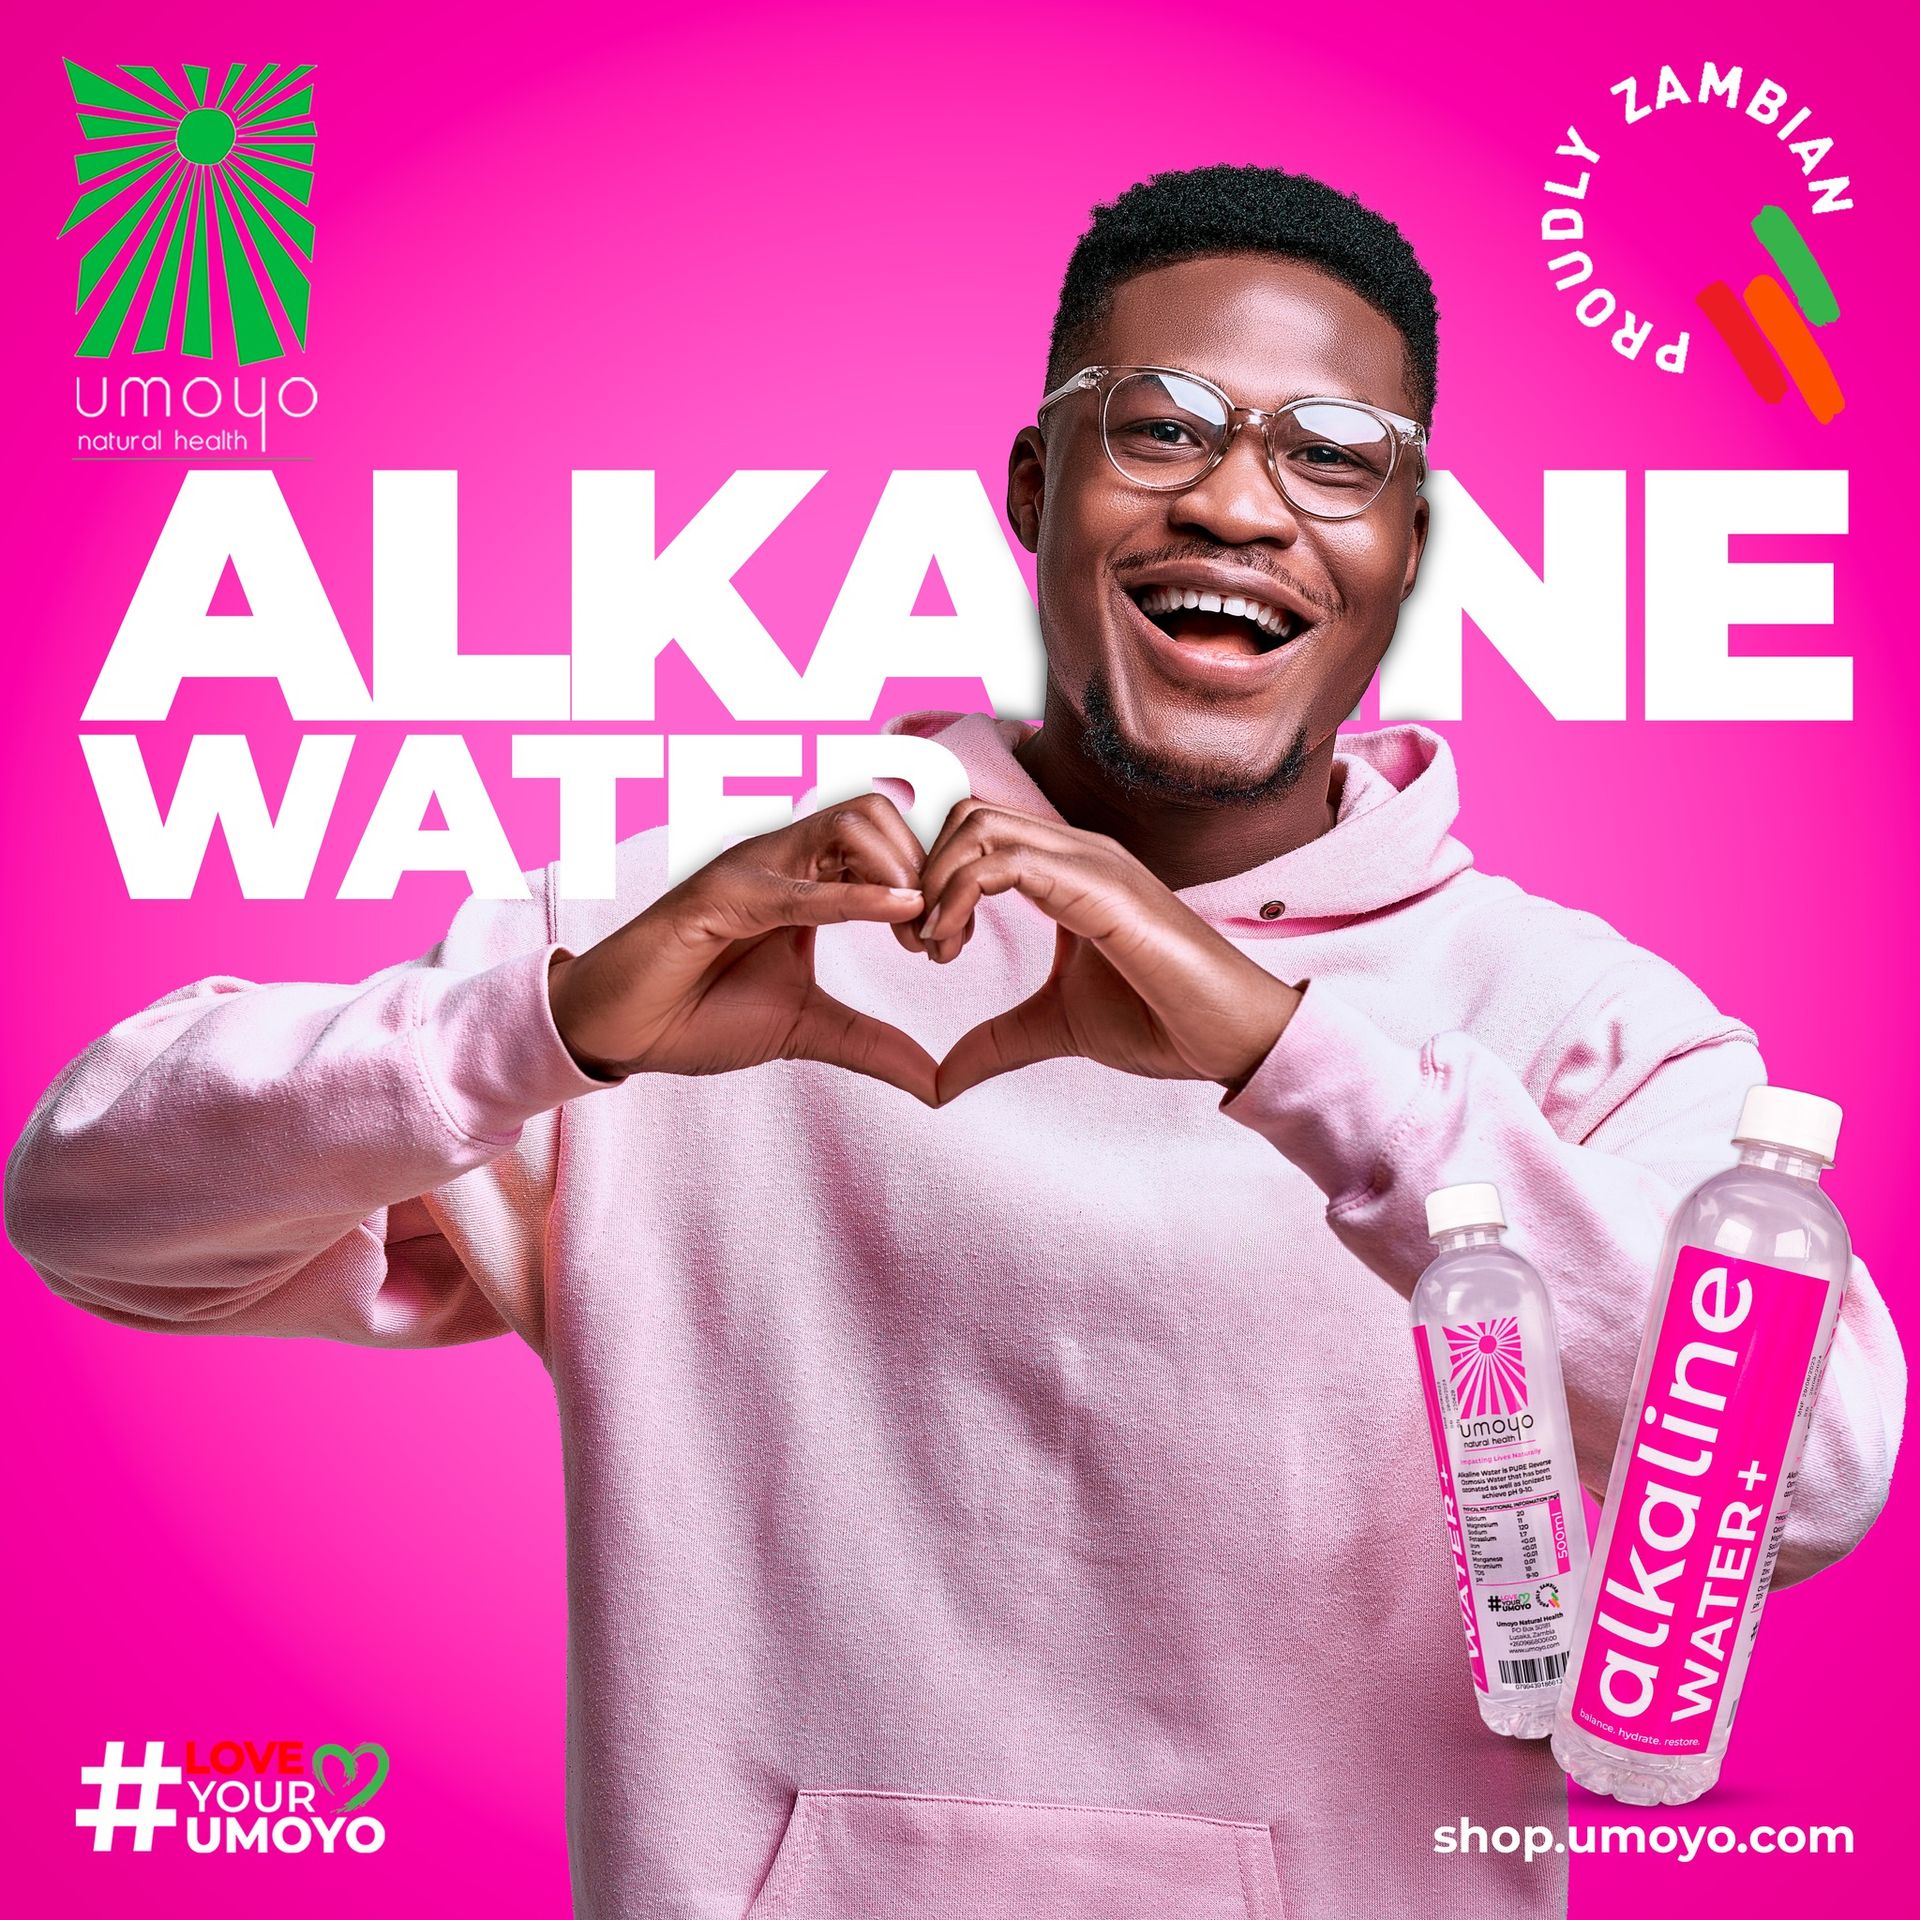 A man is making a heart shape with his hands while holding a bottle of alkaline water.